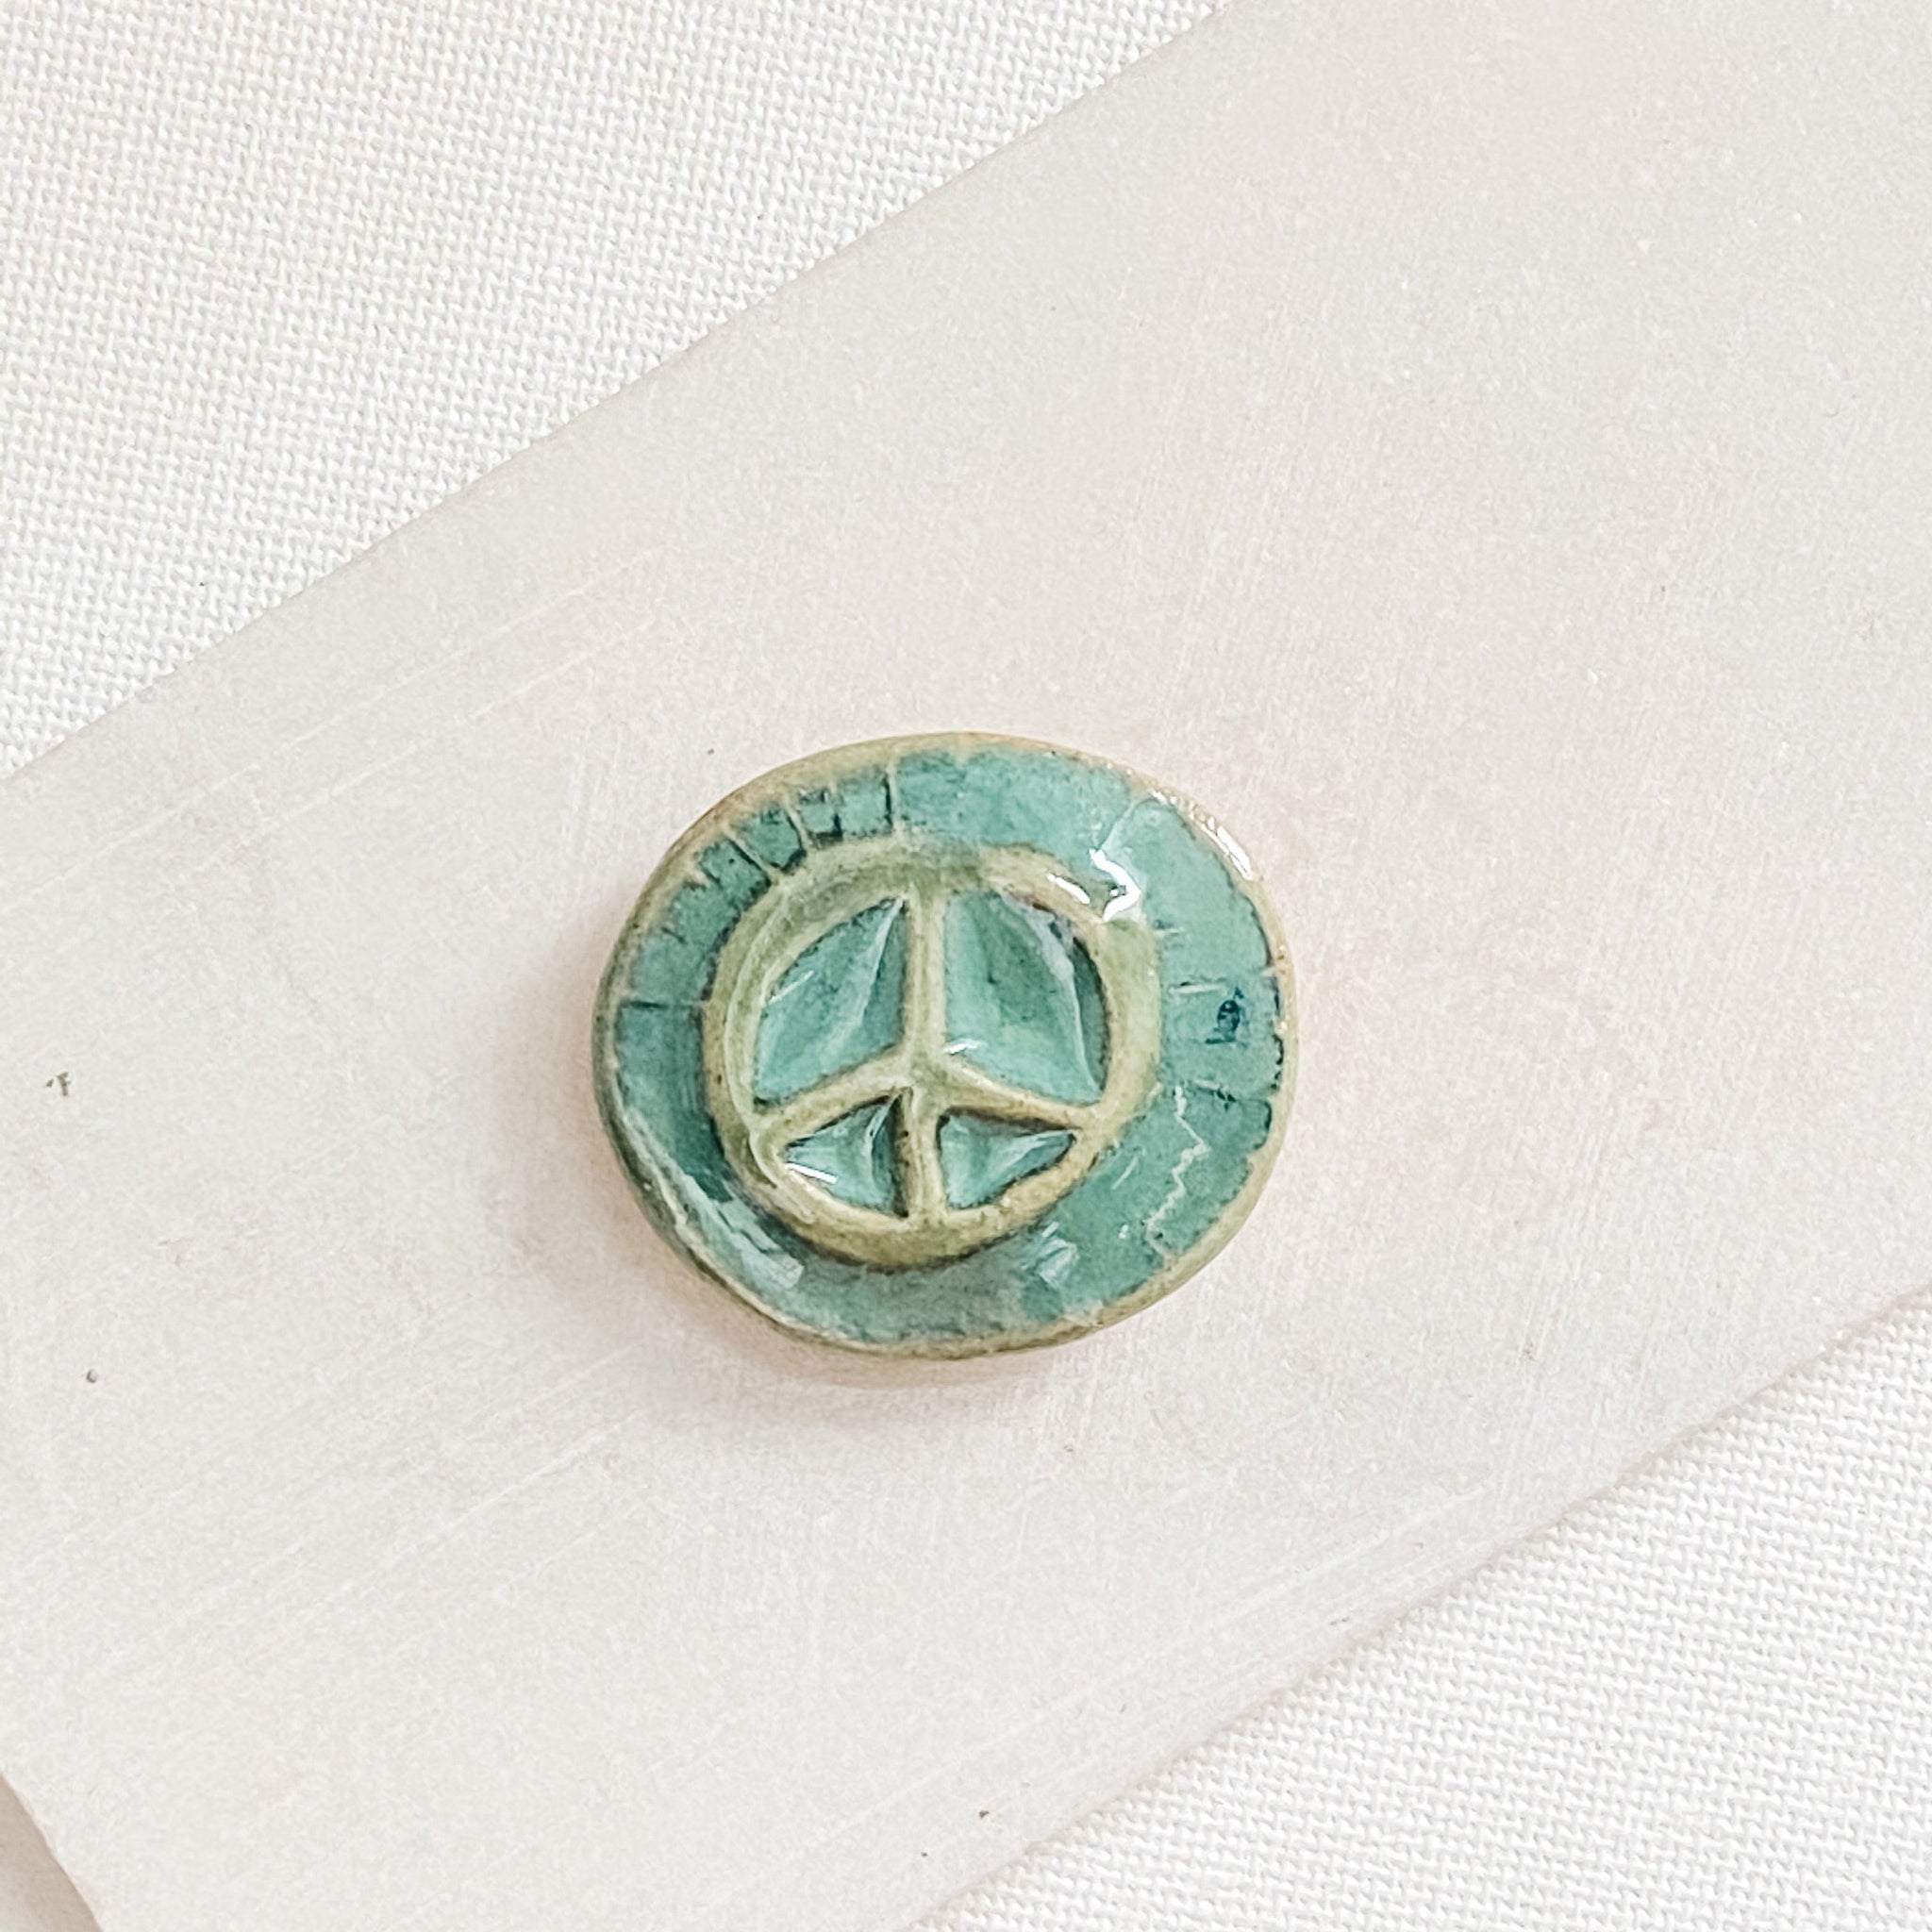 Peace Sign - Reminder Stones, Worry Stone Uni-T Small Gifts